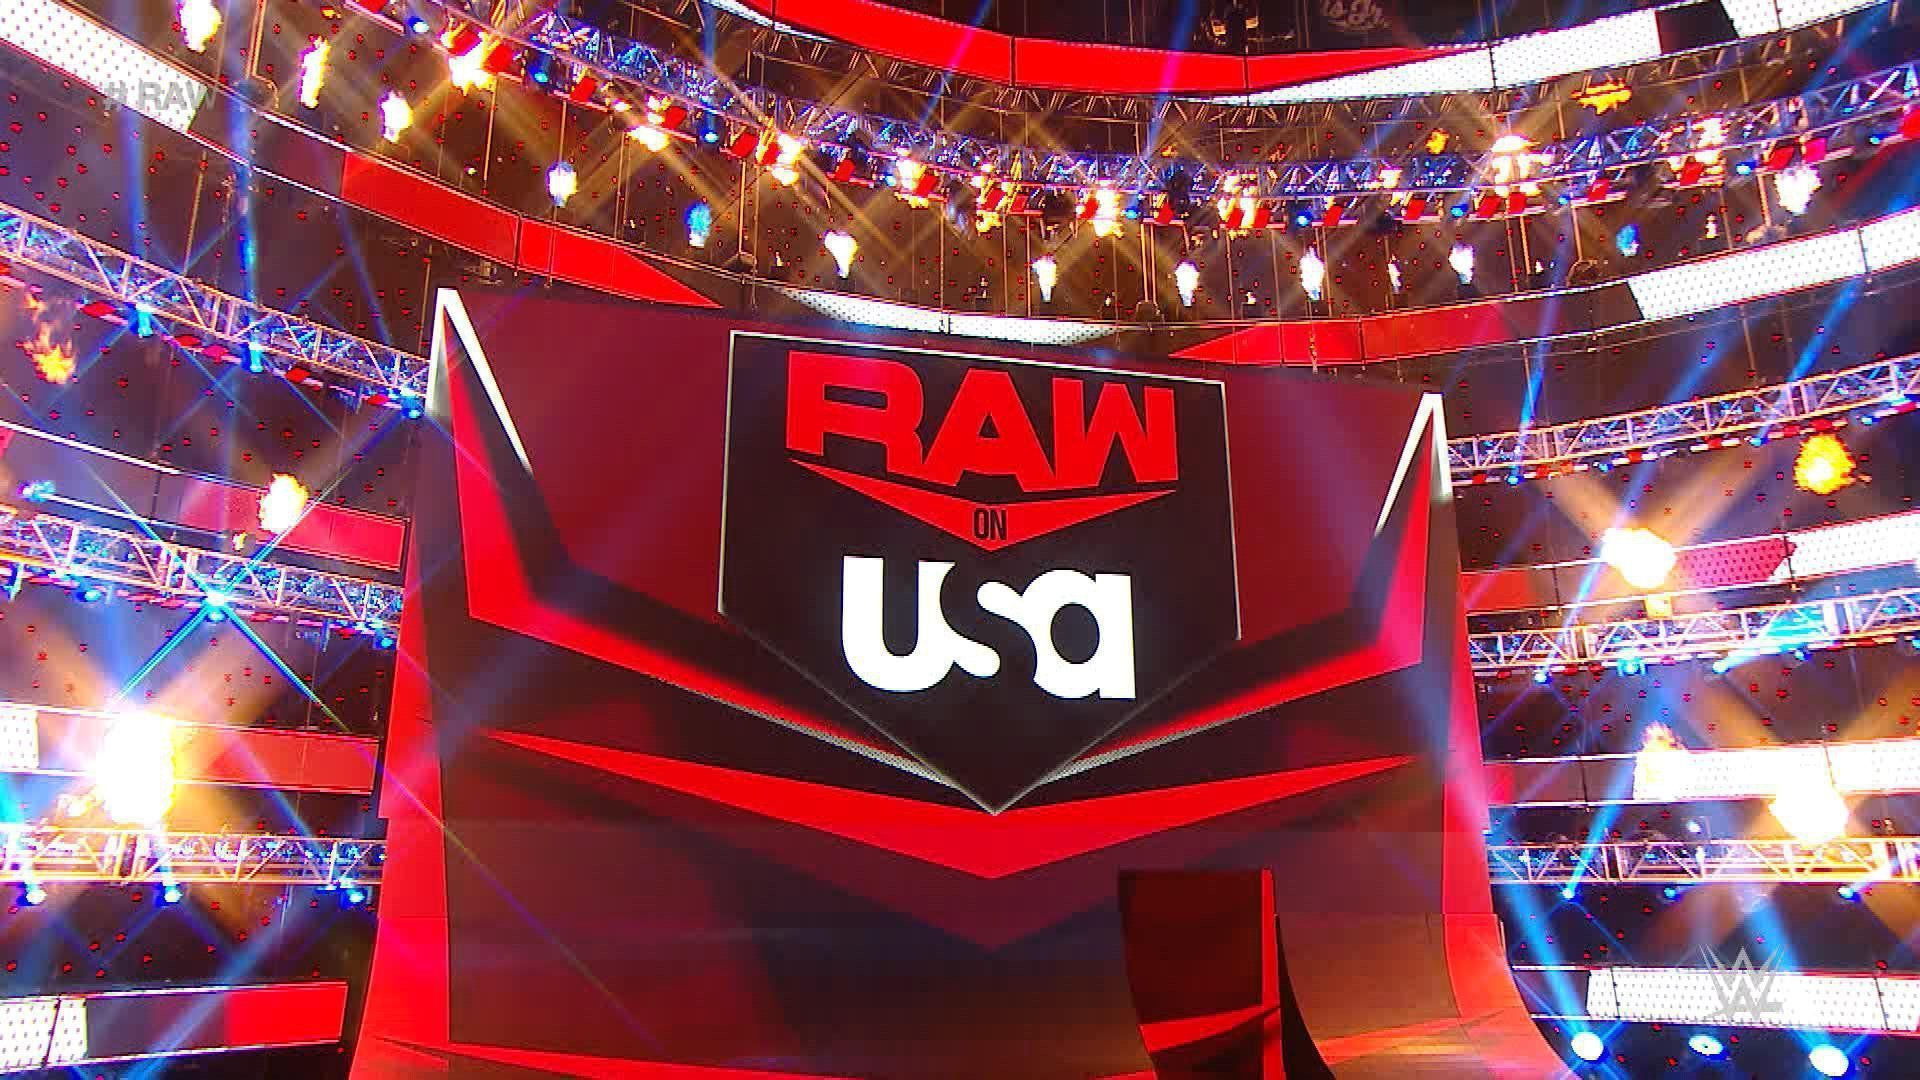 The official logos for WWE RAW and the USA Network on display